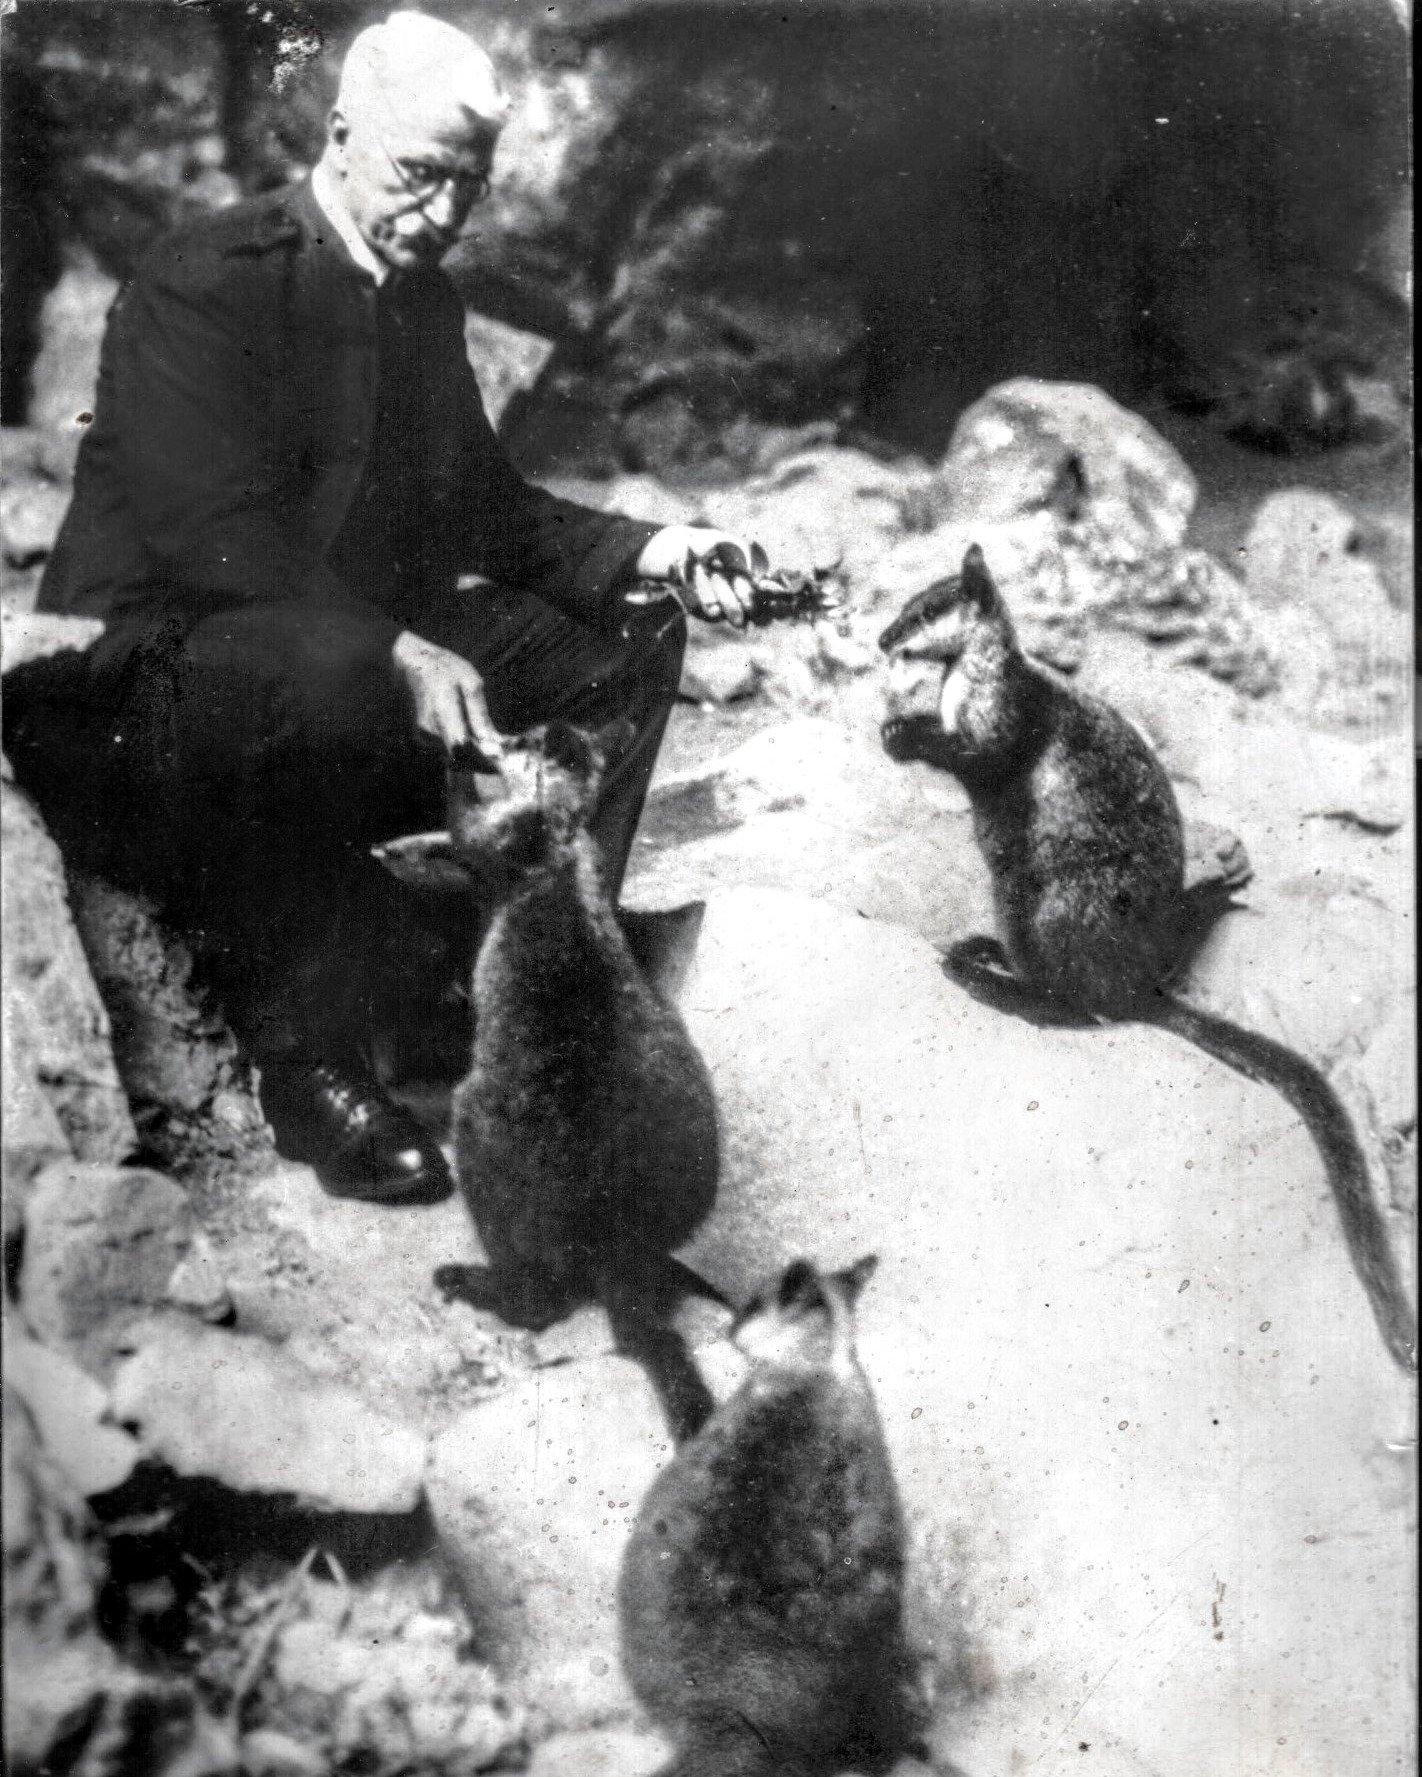 Discover the Discoverers

James Carvosso Wiburd (Voss) started as a casual guide at Jenolan in 1885 aged 19.
In 1903 he became caretaker of the caves and retired in 1932 at the age of 65.

Along with Jack Edwards (and occasionally Robert Bailey) he d